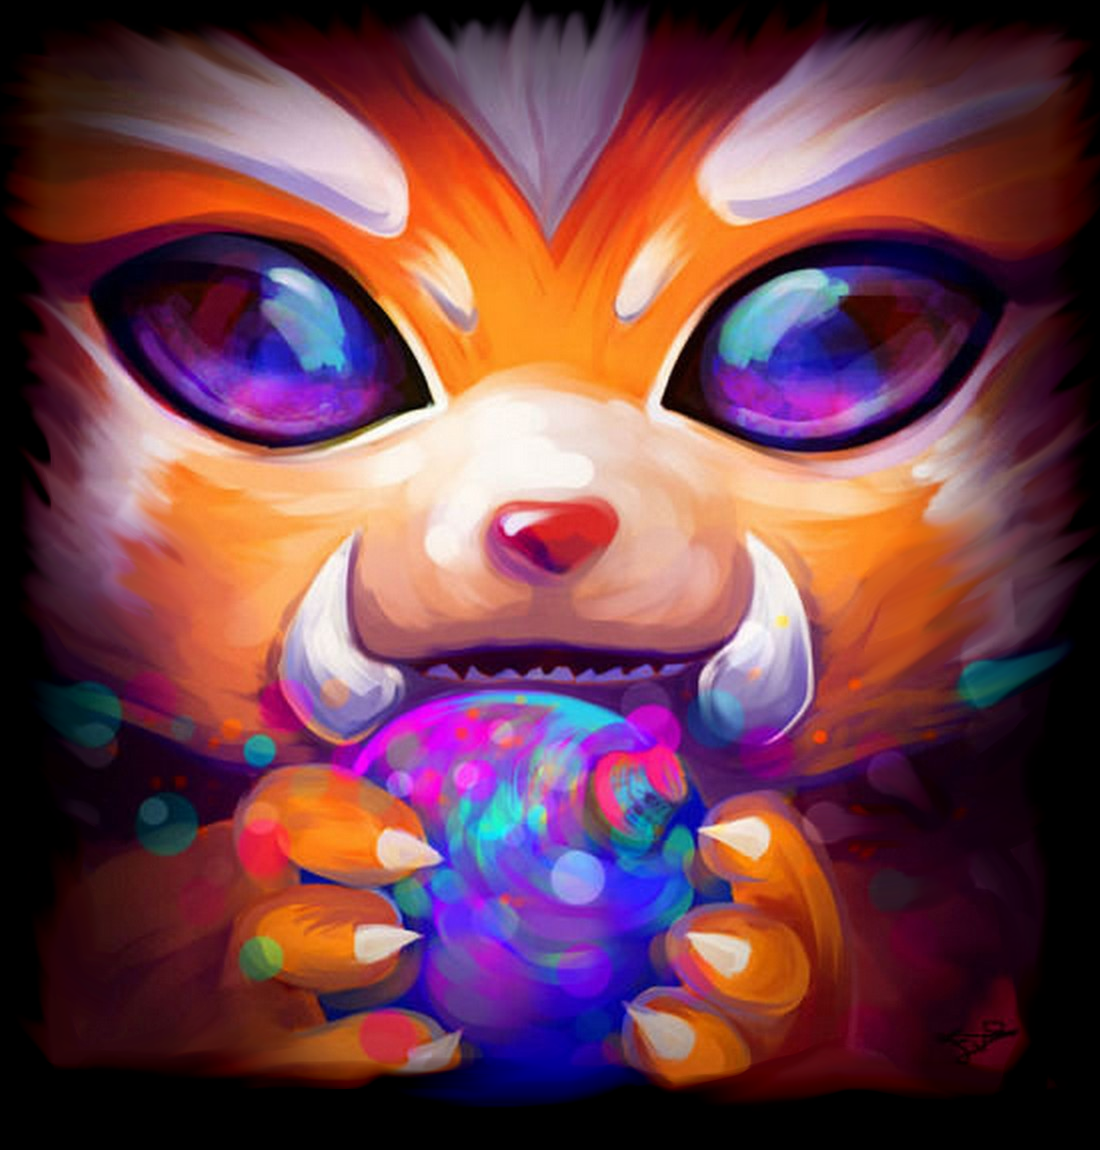 General 1100x1150 League of Legends Gnar (League of Legends) painting PC gaming